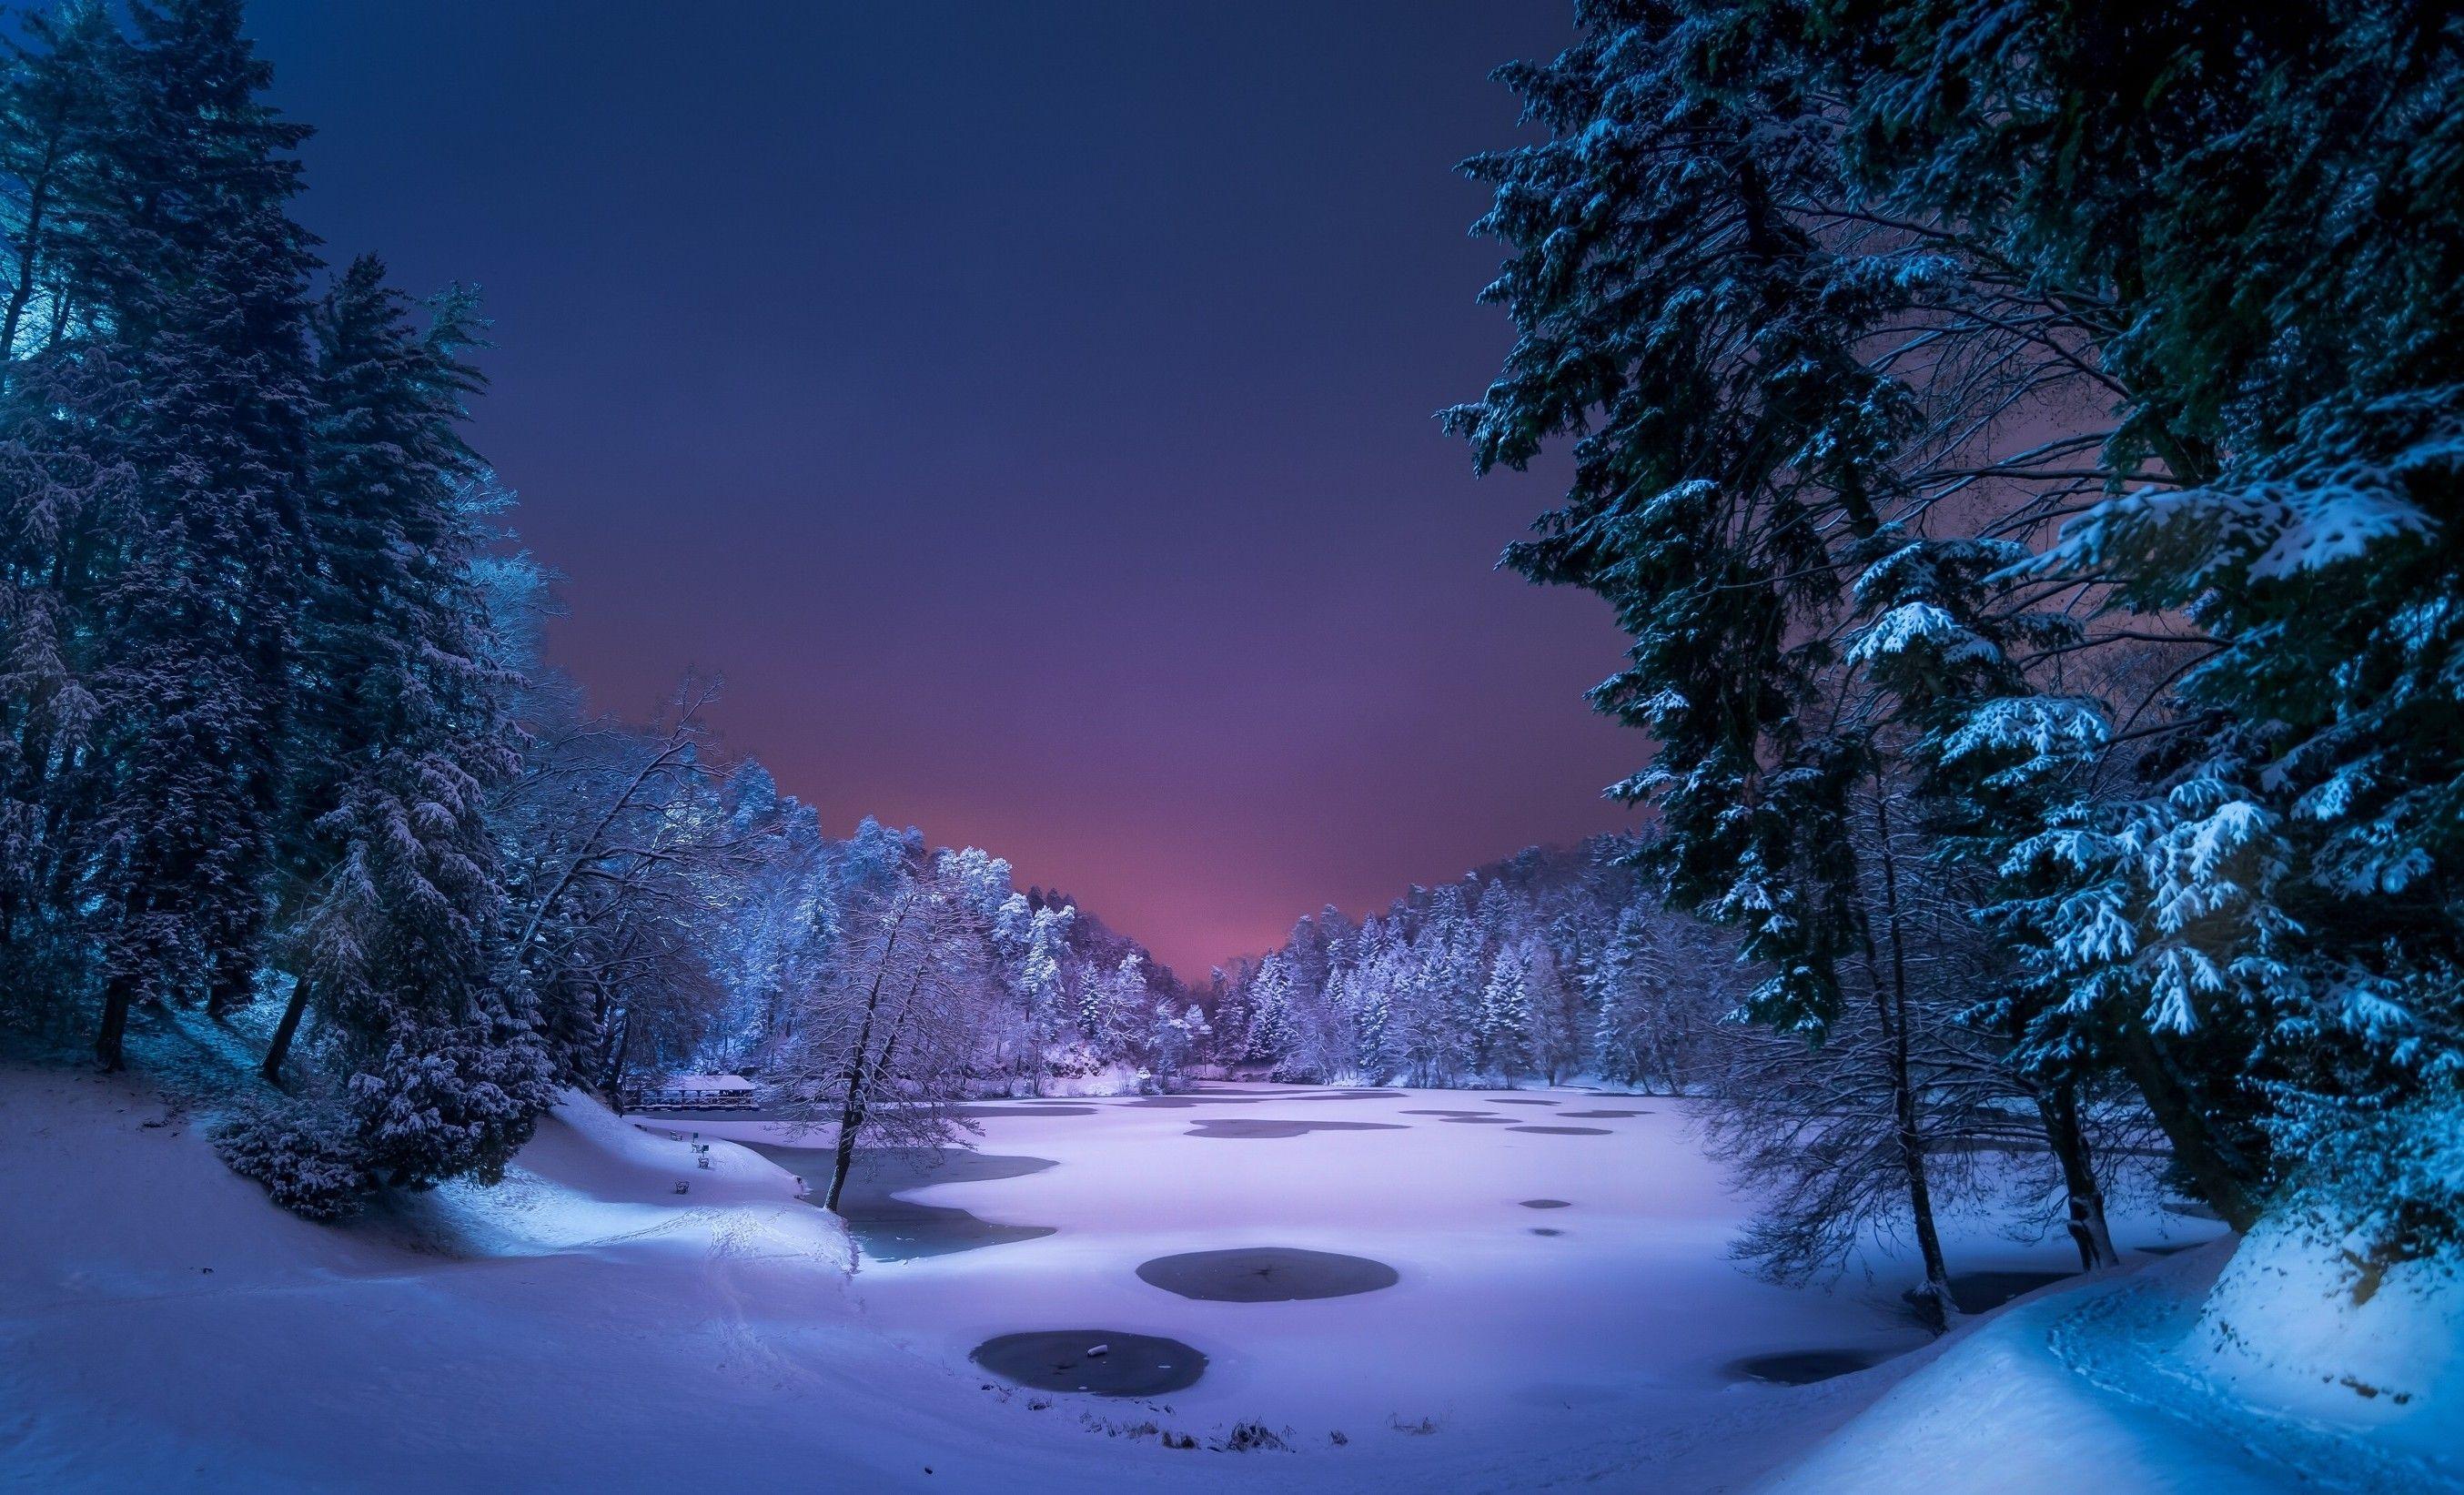 Snowy Nature Wallpapers - Wallpaper Cave